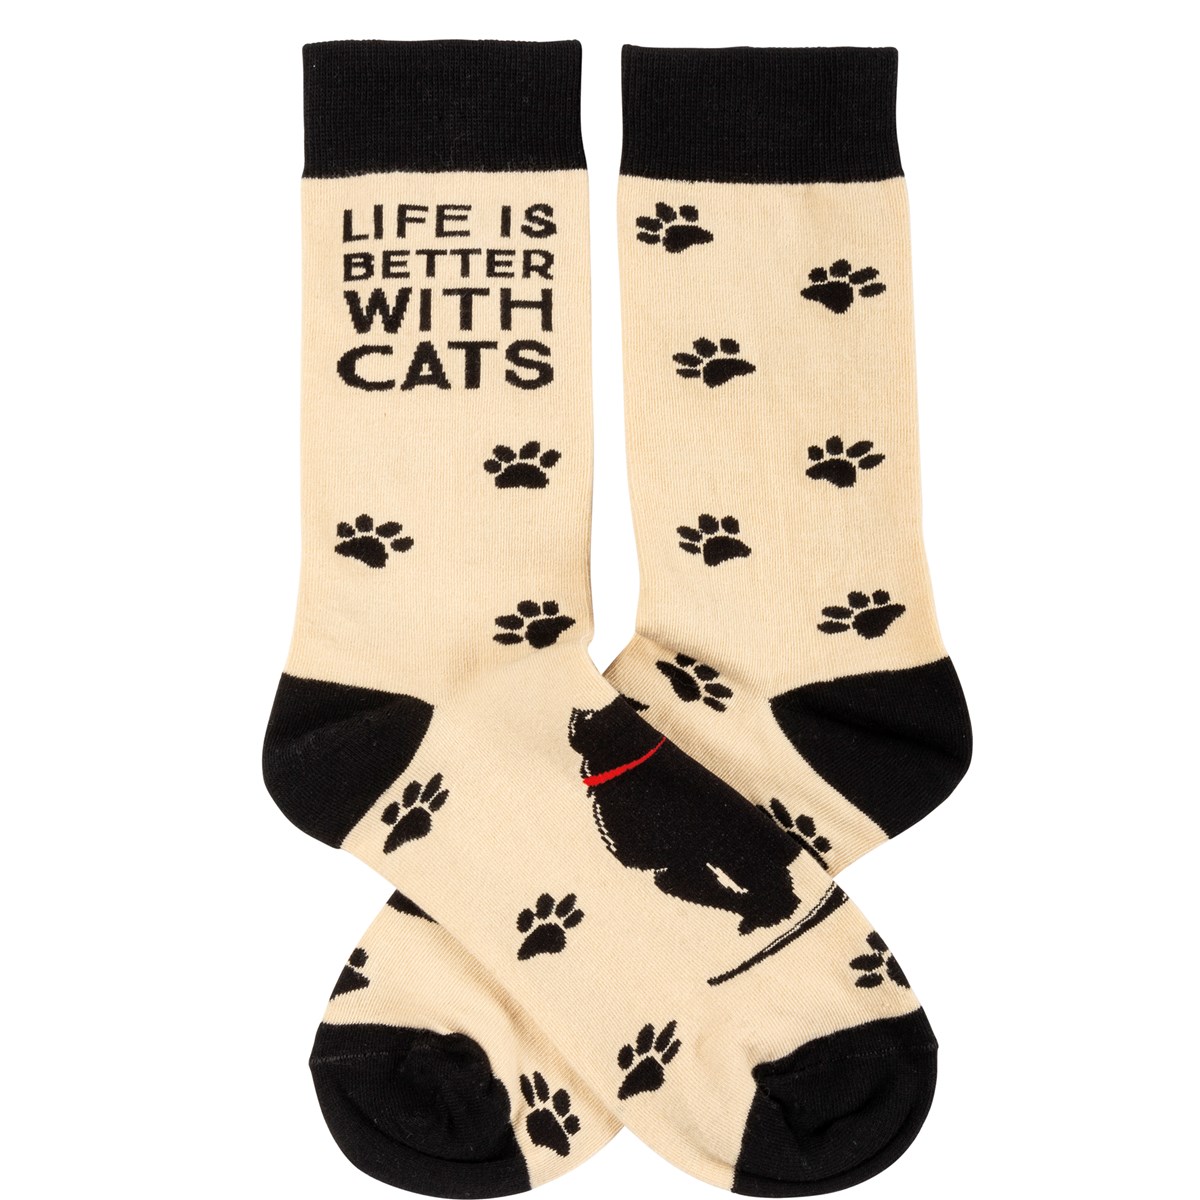 Life Is Better With Cats Socks - Cotton, Nylon, Spandex